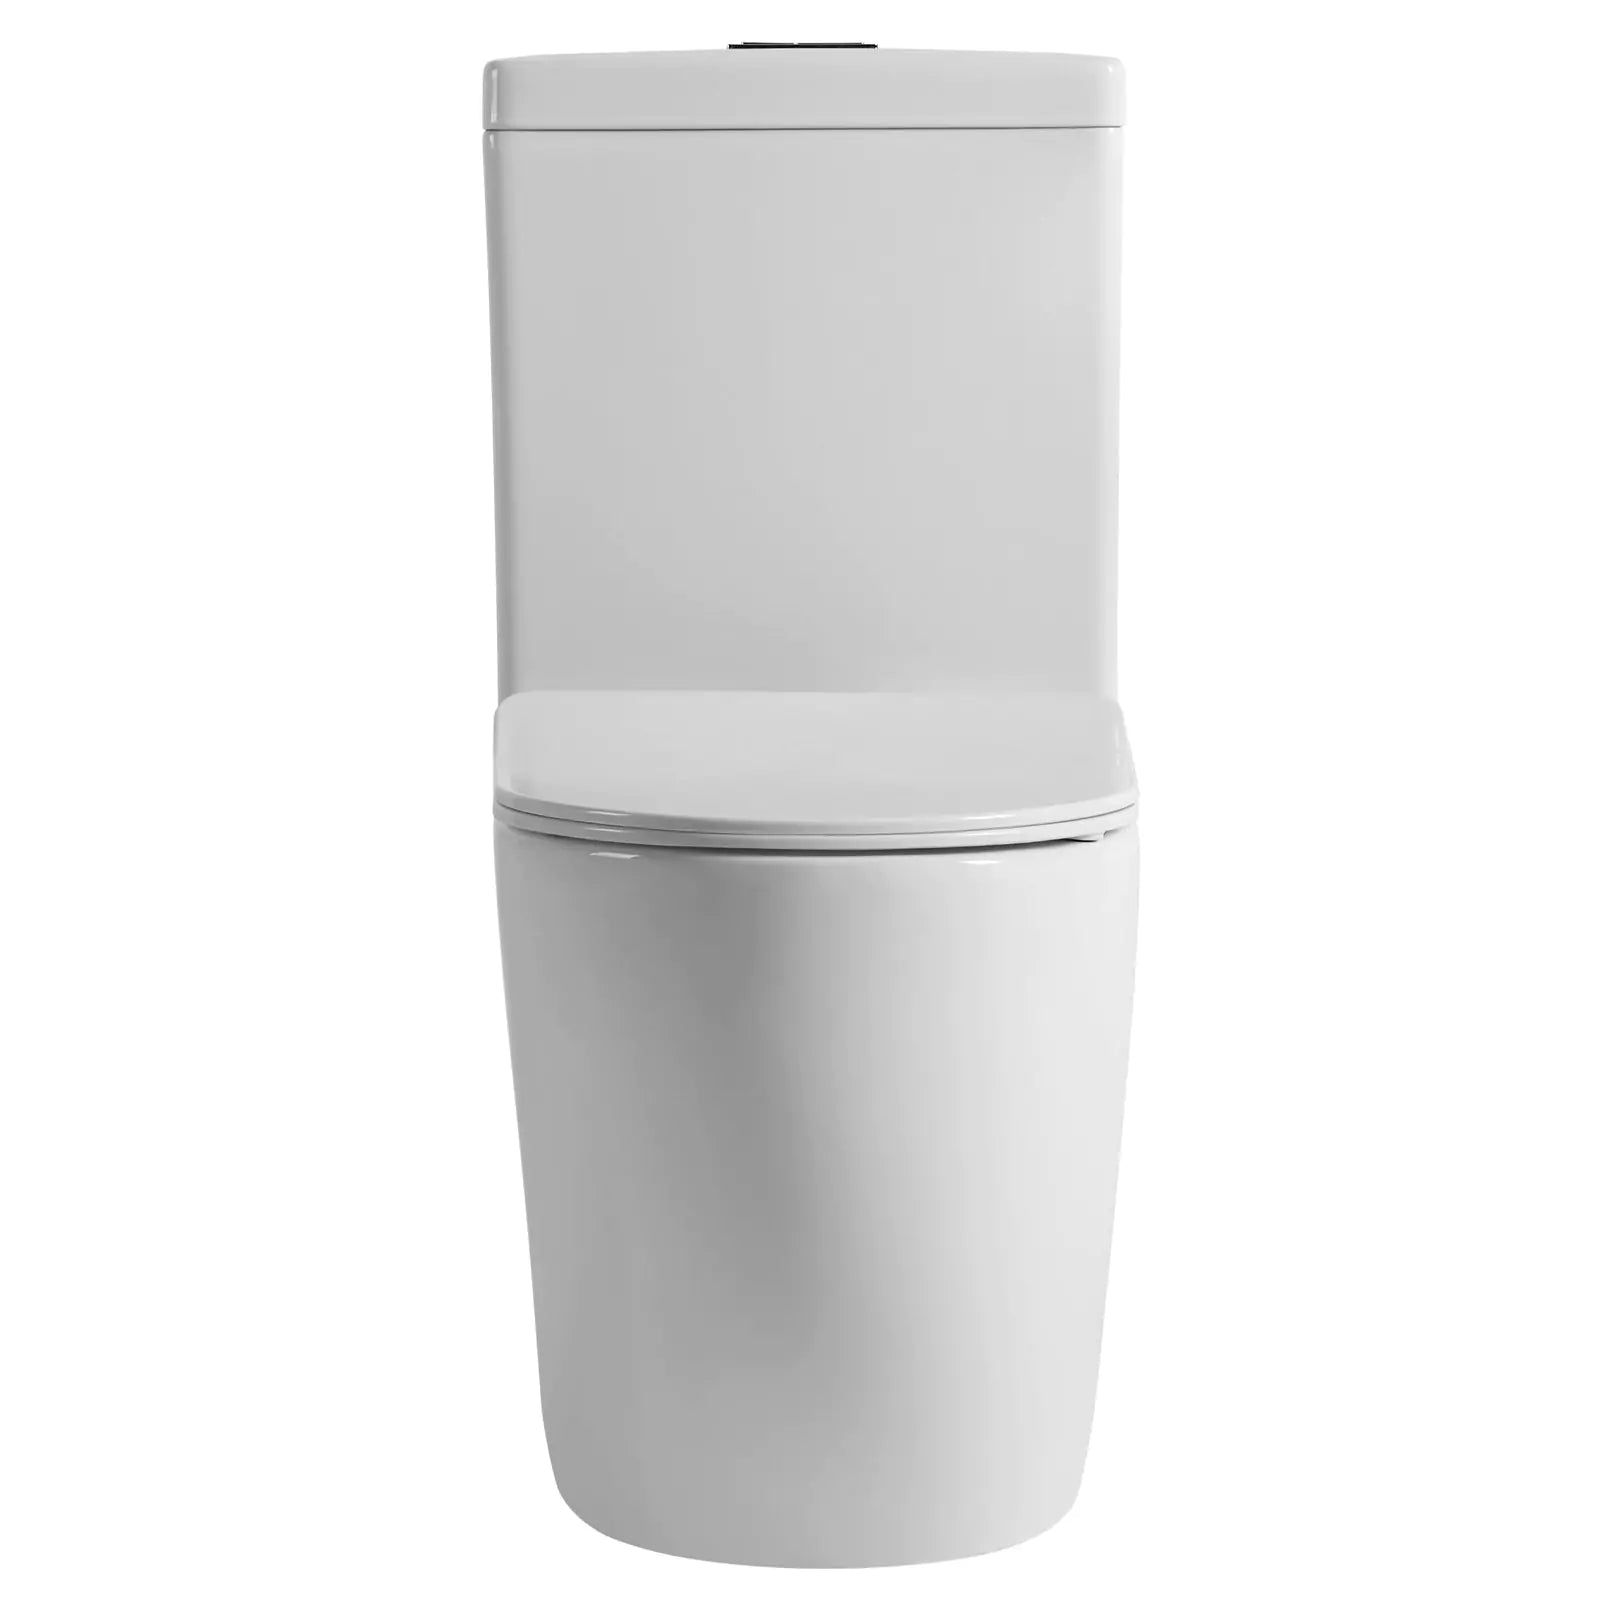 Veda Back-to-Wall Toilet Suite in Gloss White-KDK025C/KDK025P